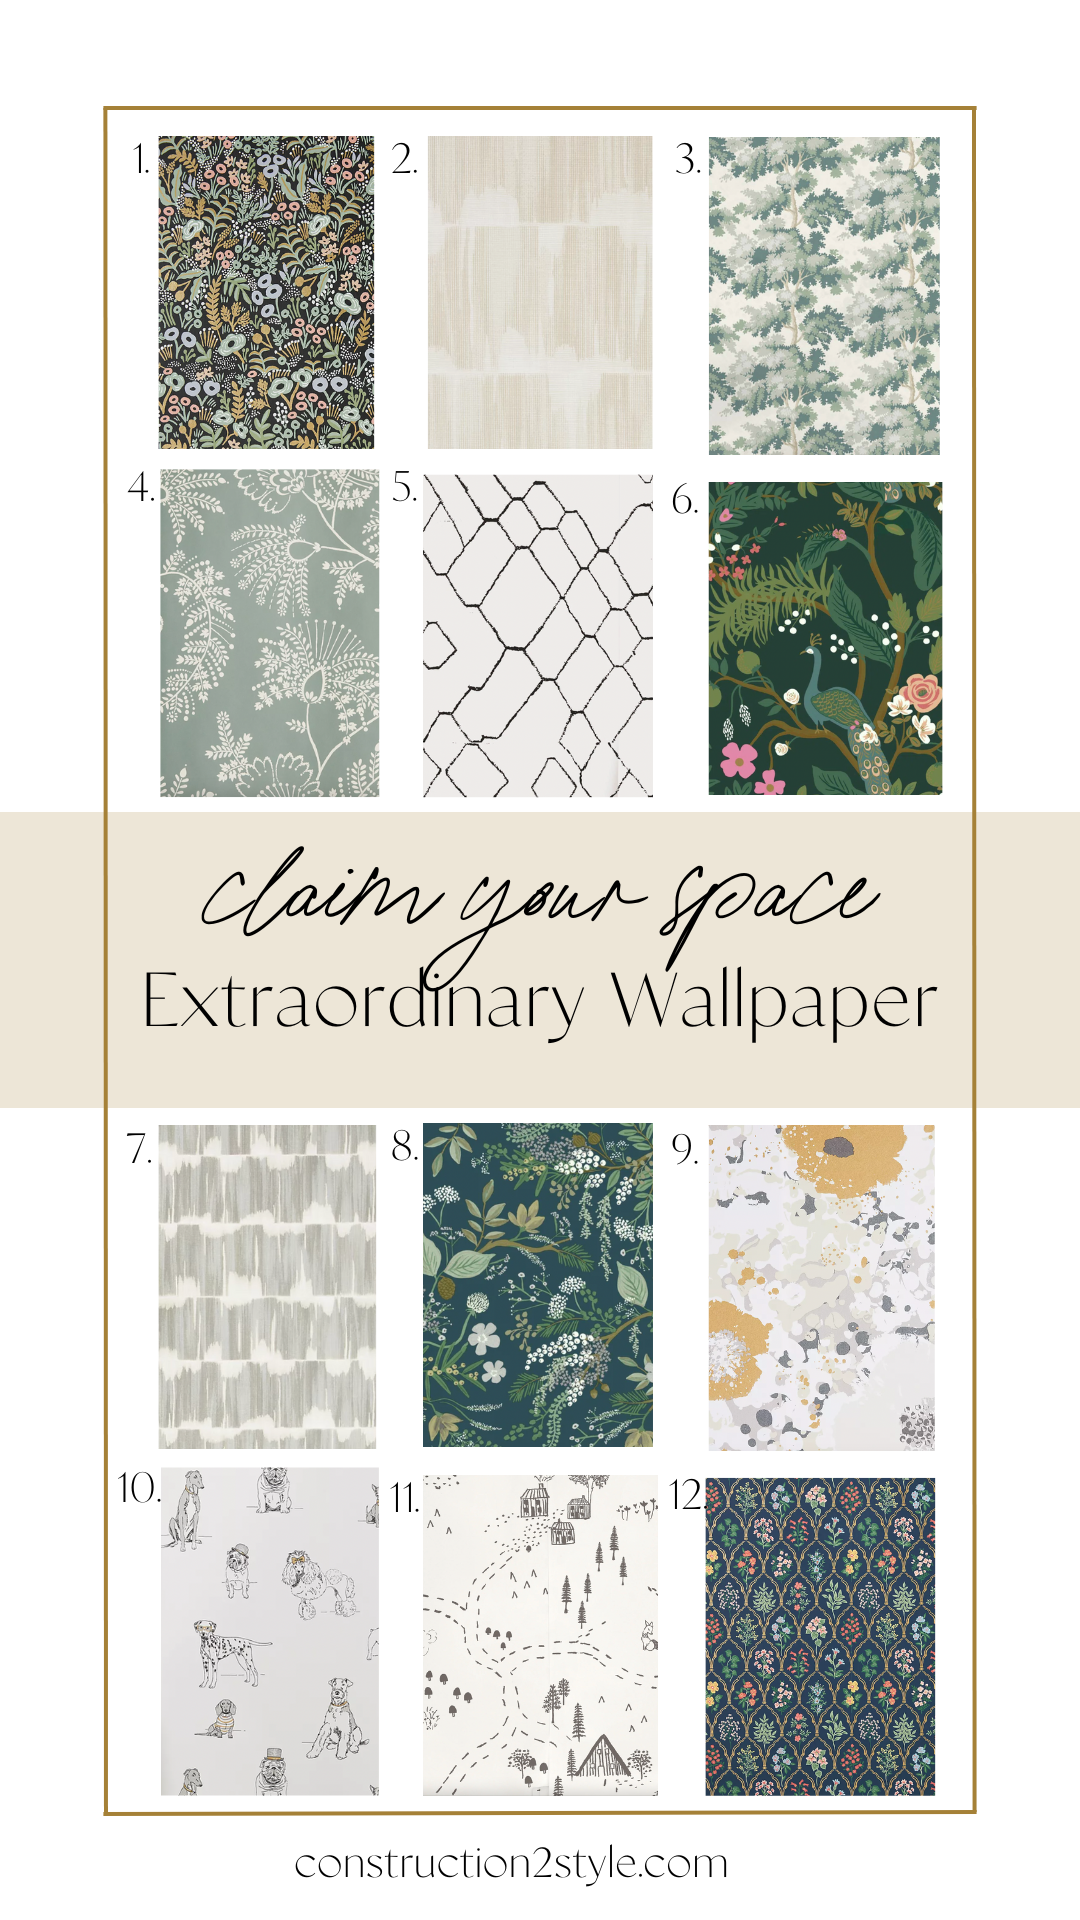 wallpaper selection - 7 spaces 